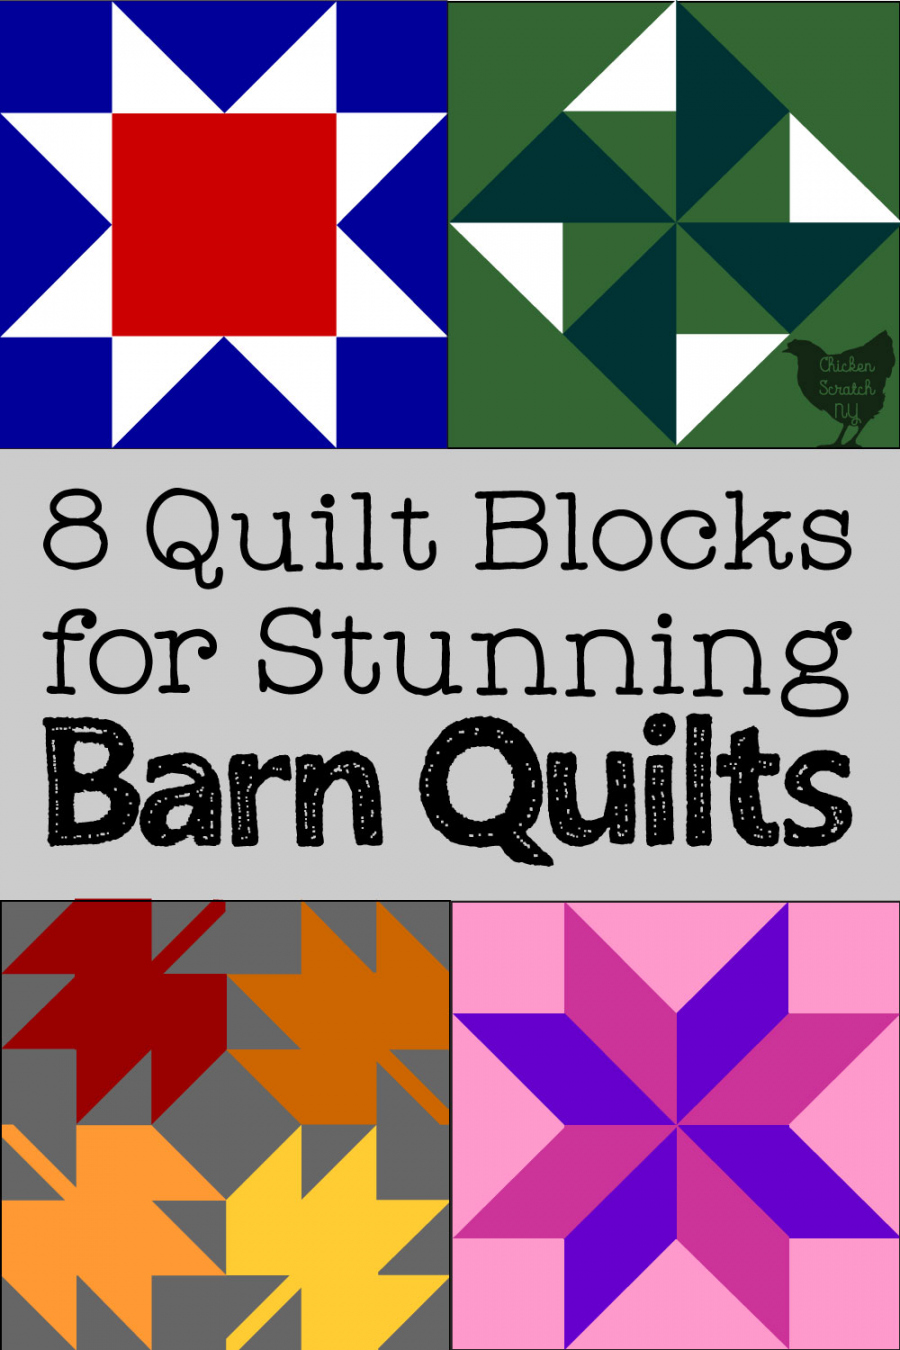 Beautiful Quilt Blocks for Barn Quilts [Free Printable) - FREE Printables - Beginner Free Printable Barn Quilt Patterns